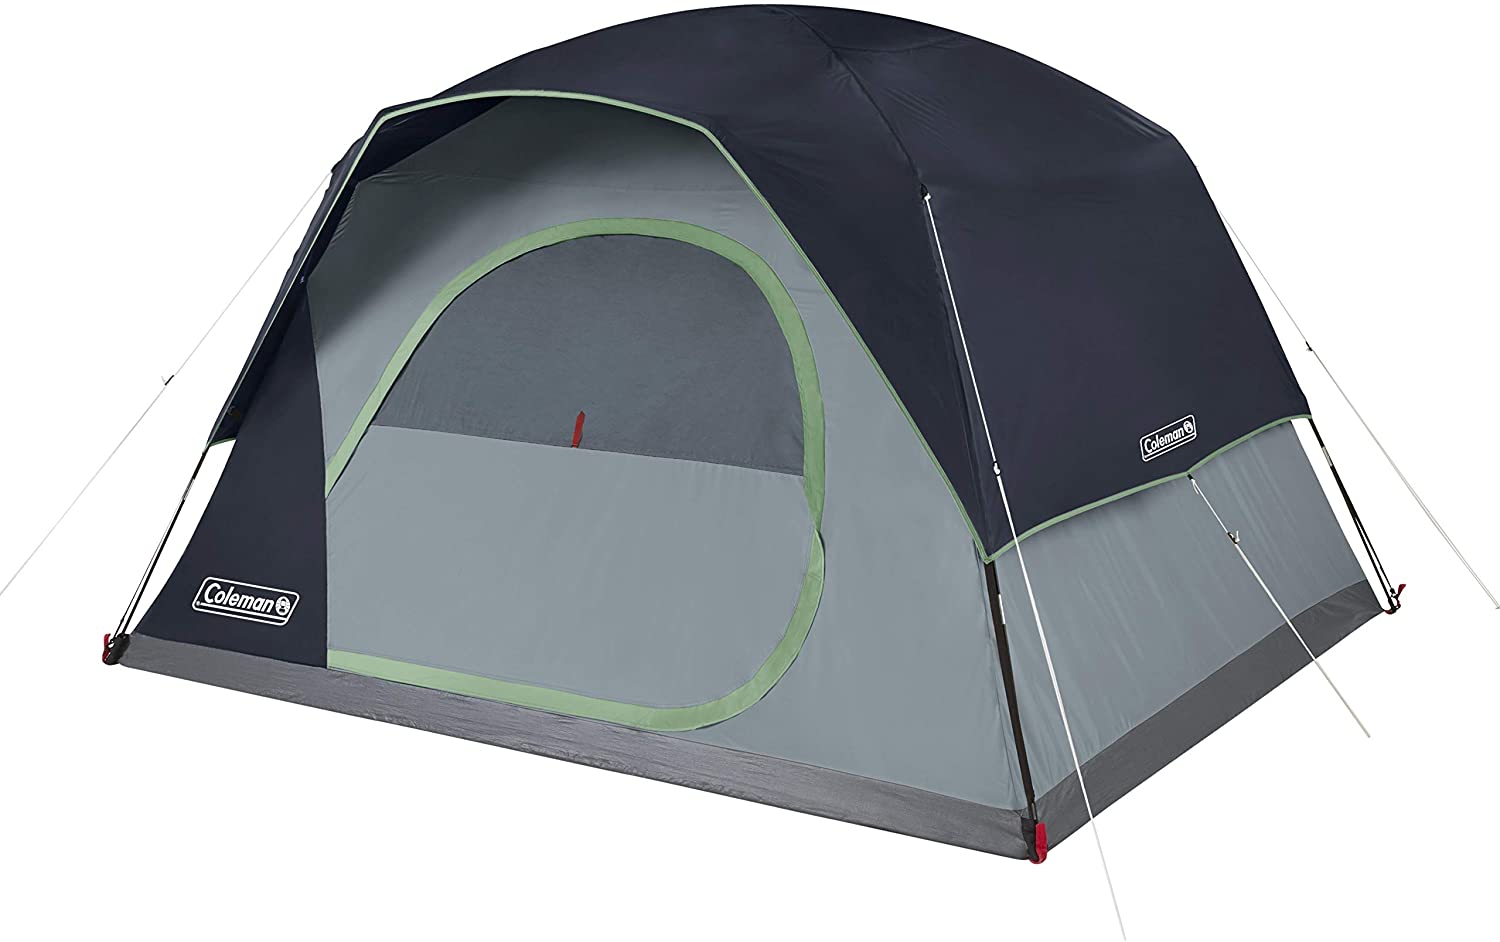 Coleman Skydome camping tent